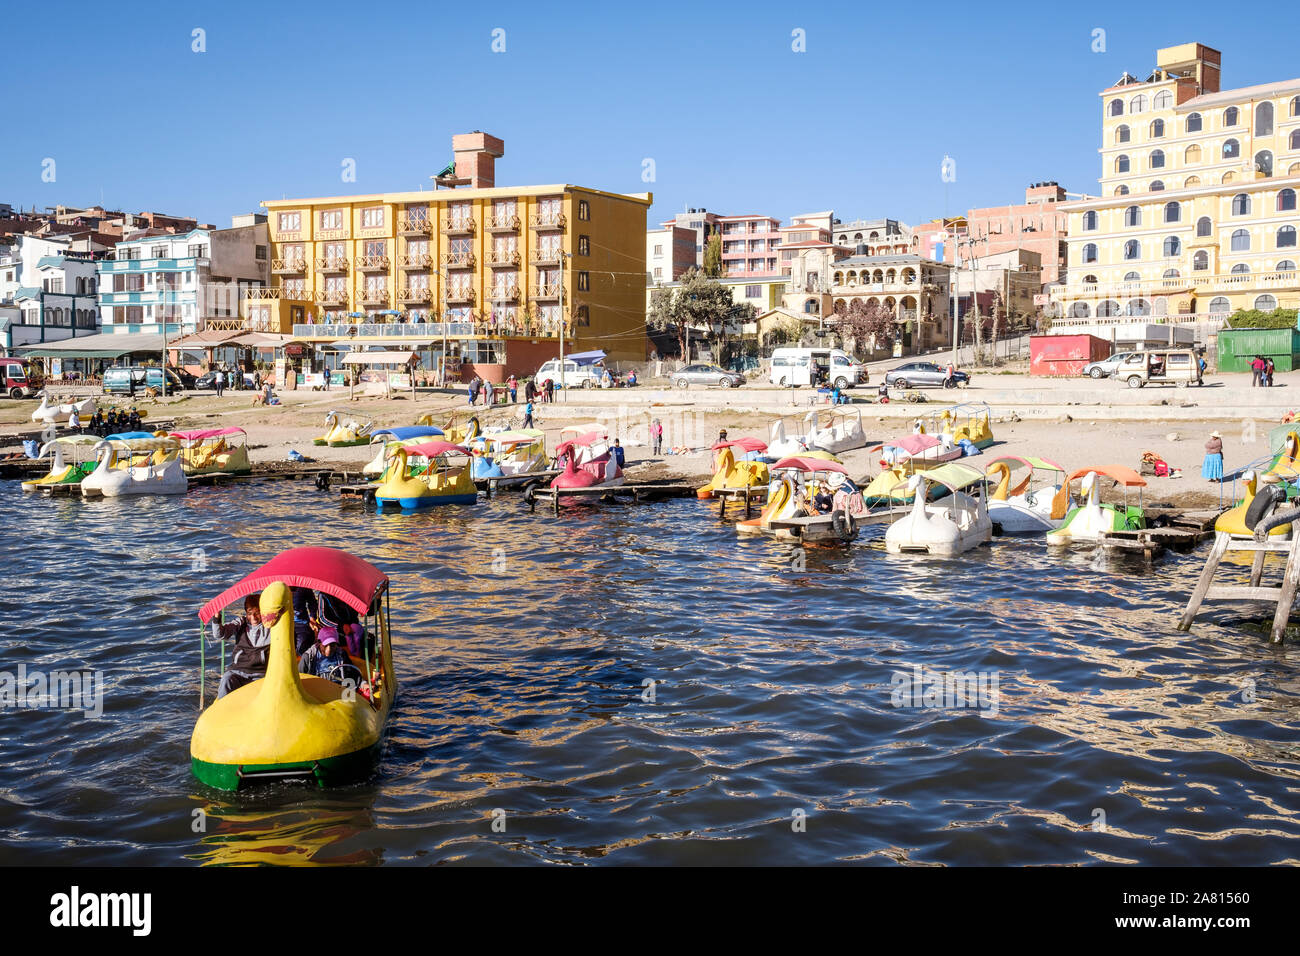 Local people riding on a duck-shaped boat in Copacabana beach, Bolivia Stock Photo